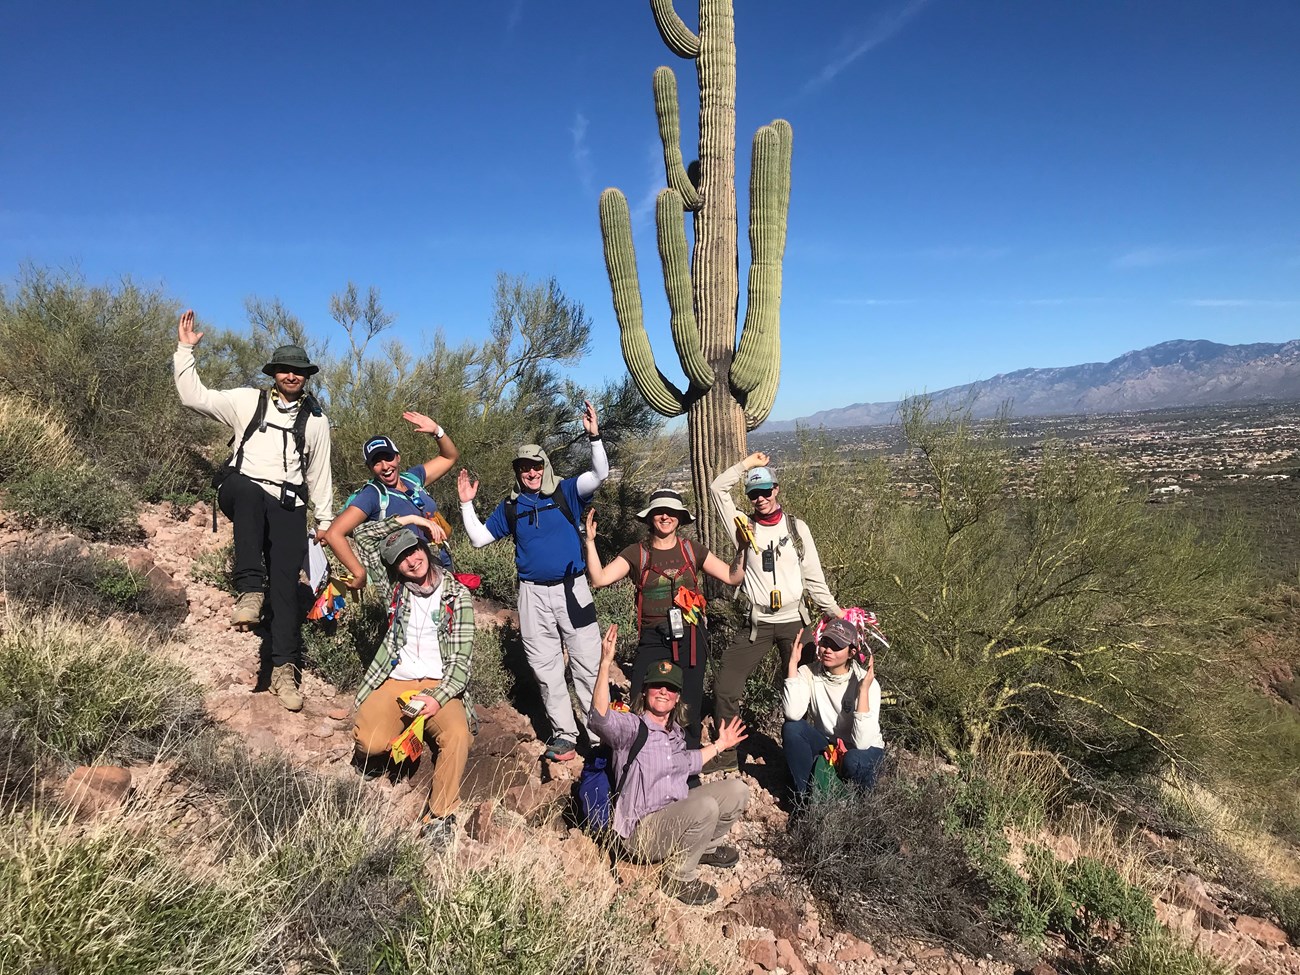 Group photo after the census. They are posing like a saguaro.